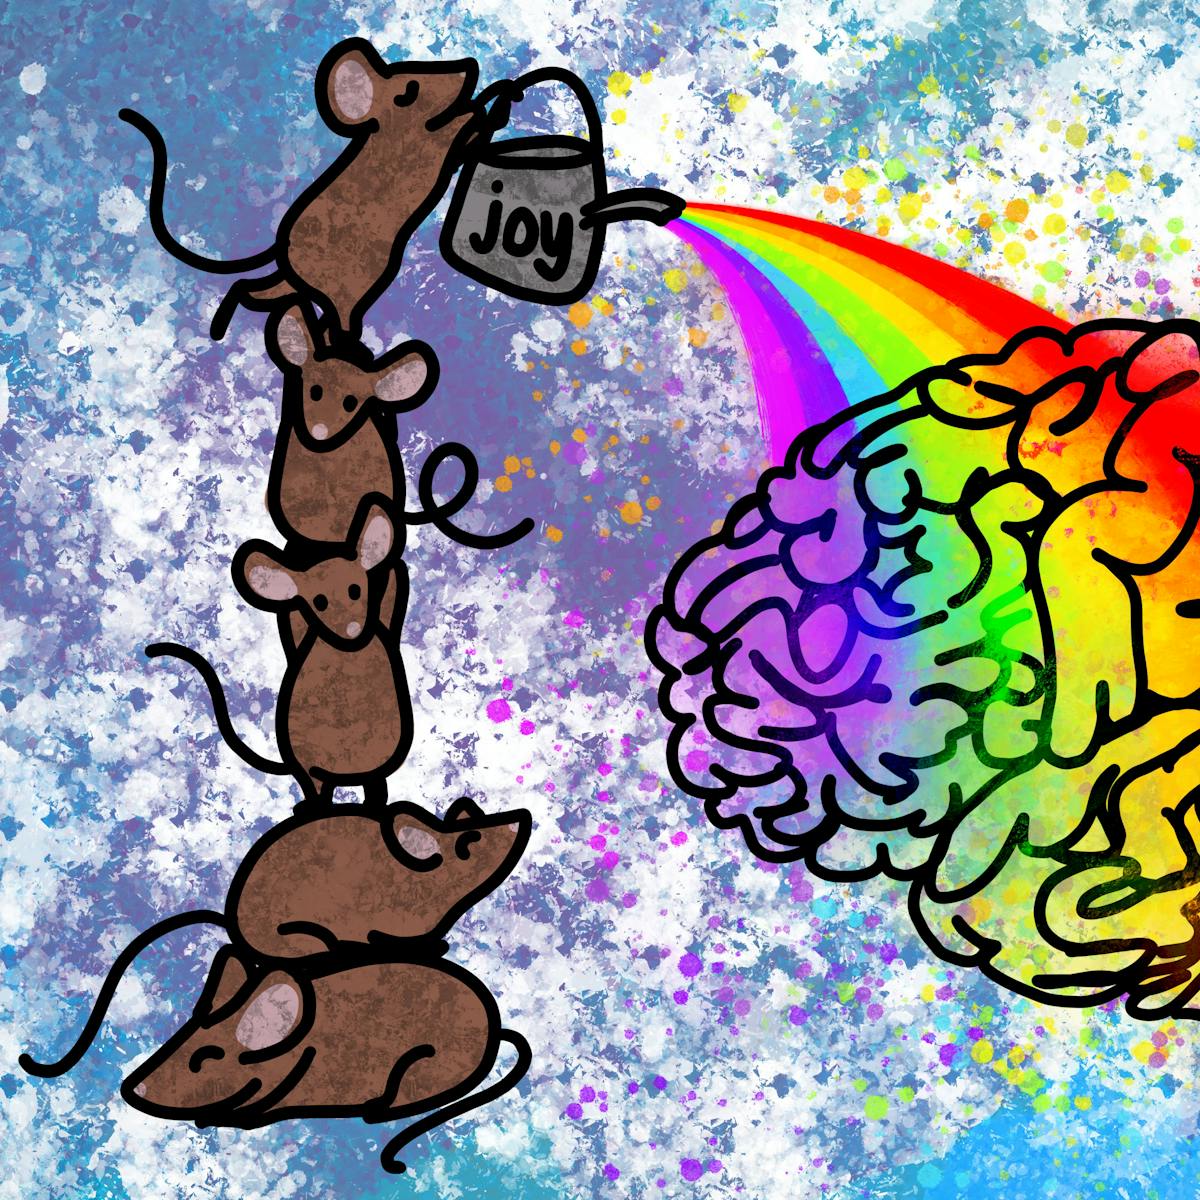 Colourful digital artwork made up of a mottled, paint splattered background containing blues, whites, reds, pinks, yellow and oranges. On top of the background are 6 brown rats standing one on top of the other forming a tower. The rat at the top is holding a watering can with the word 'joy' written on the side. Out of the watering can is streaming a flow of rainbow rays which fall down onto a line drawing of a brain.